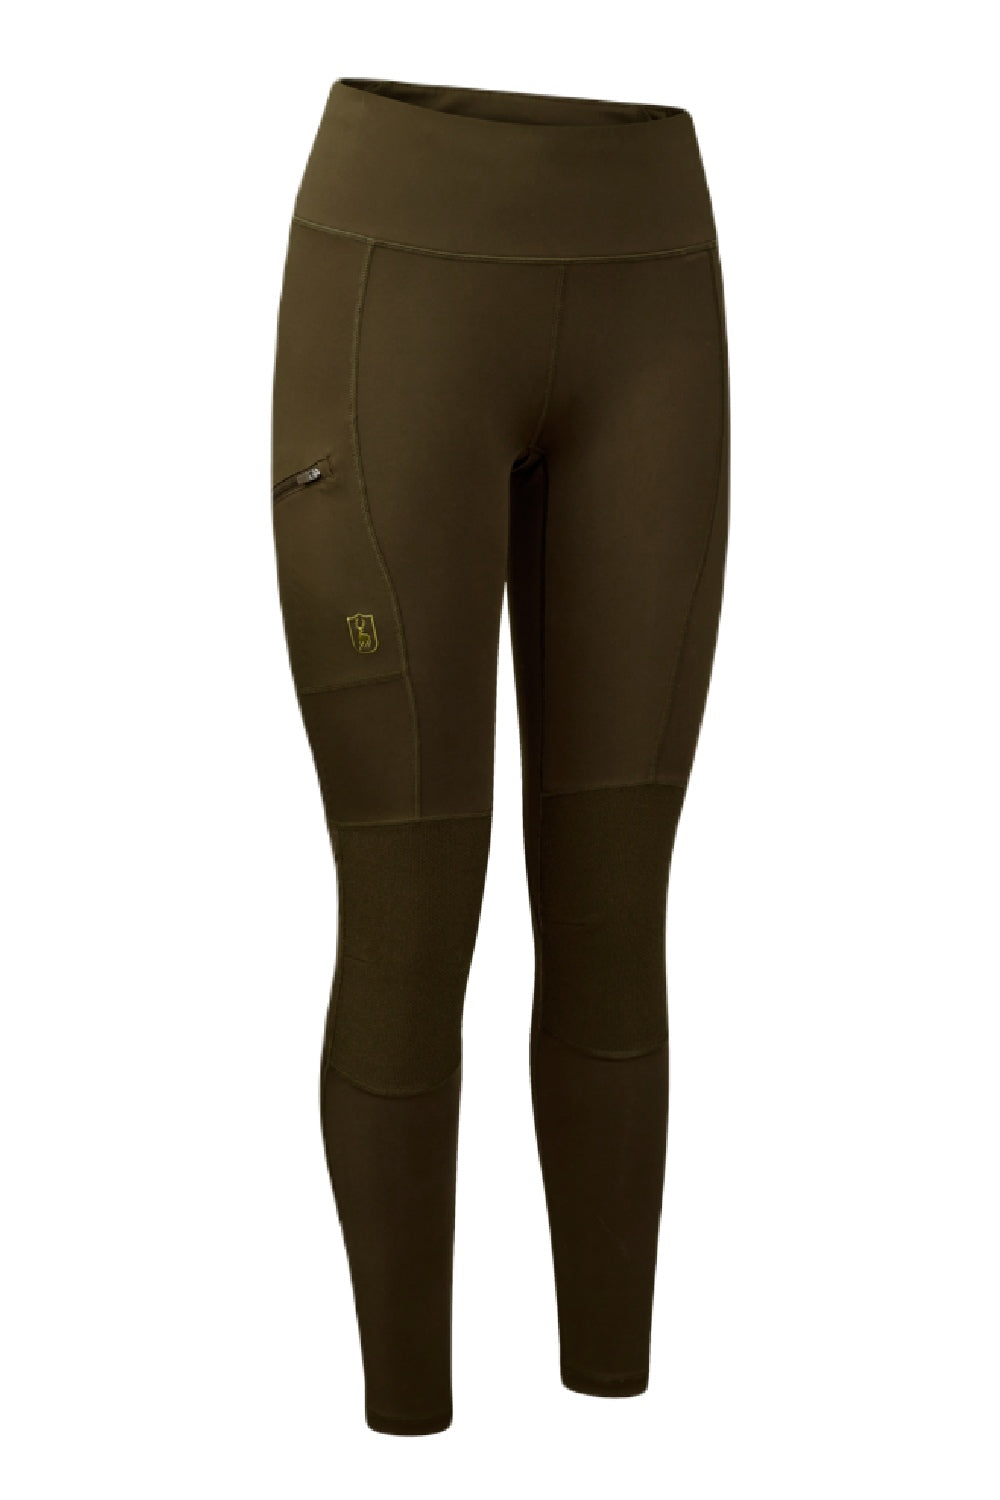 Women's Insect Shield® Durrel Leggings - Charcoal